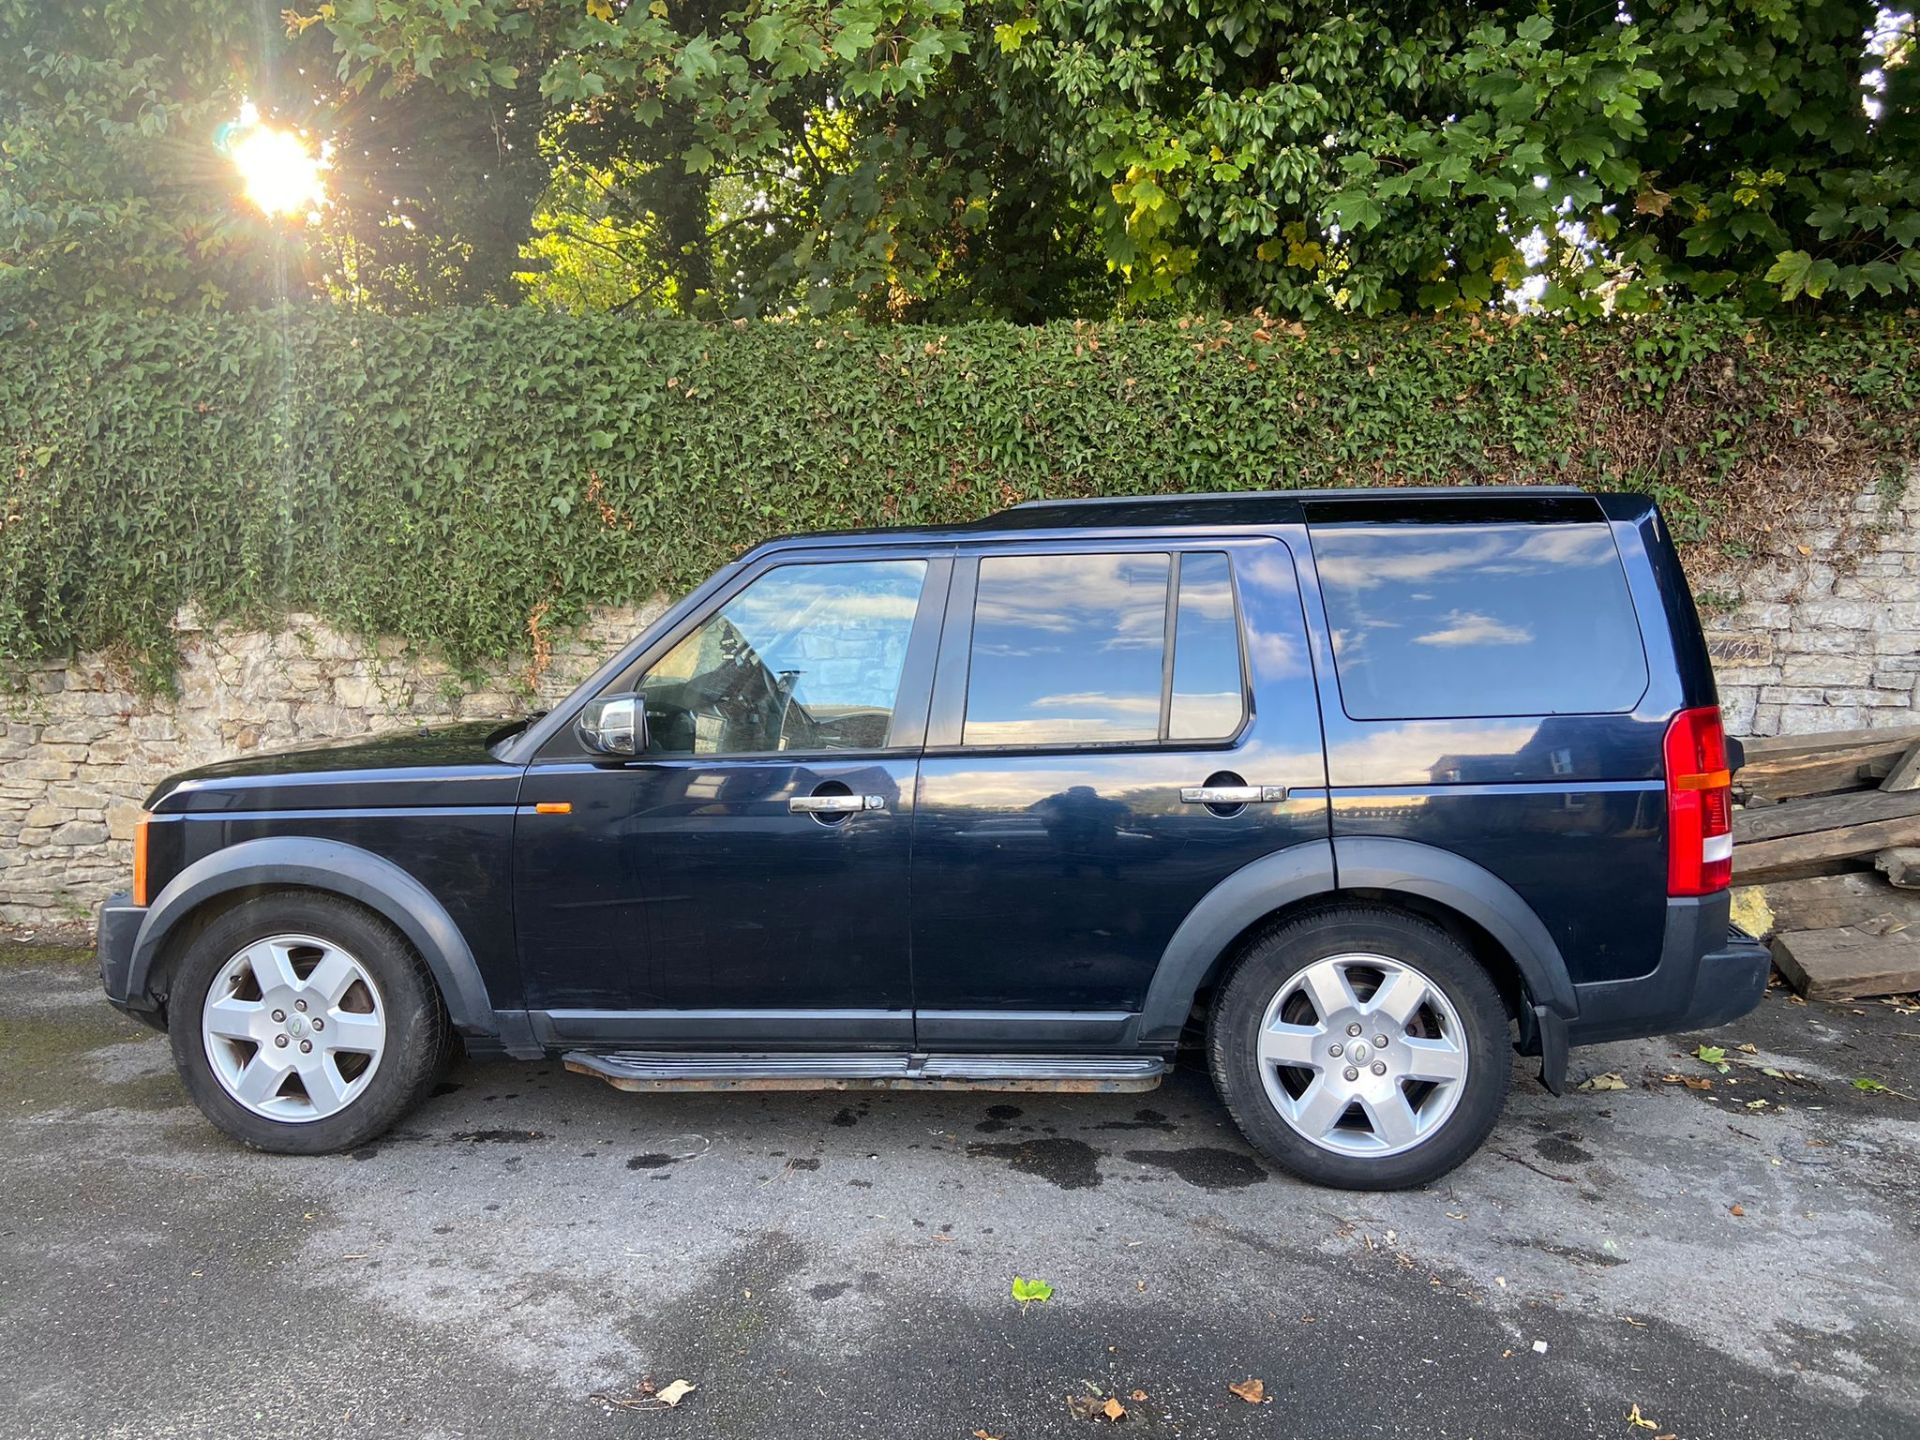 2004 54 Land Rover Discovery 3 2.7 TDV6 HSE Automatic - HIGH SPEC - AIR SUSPENSION *NO VAT* - Image 6 of 9